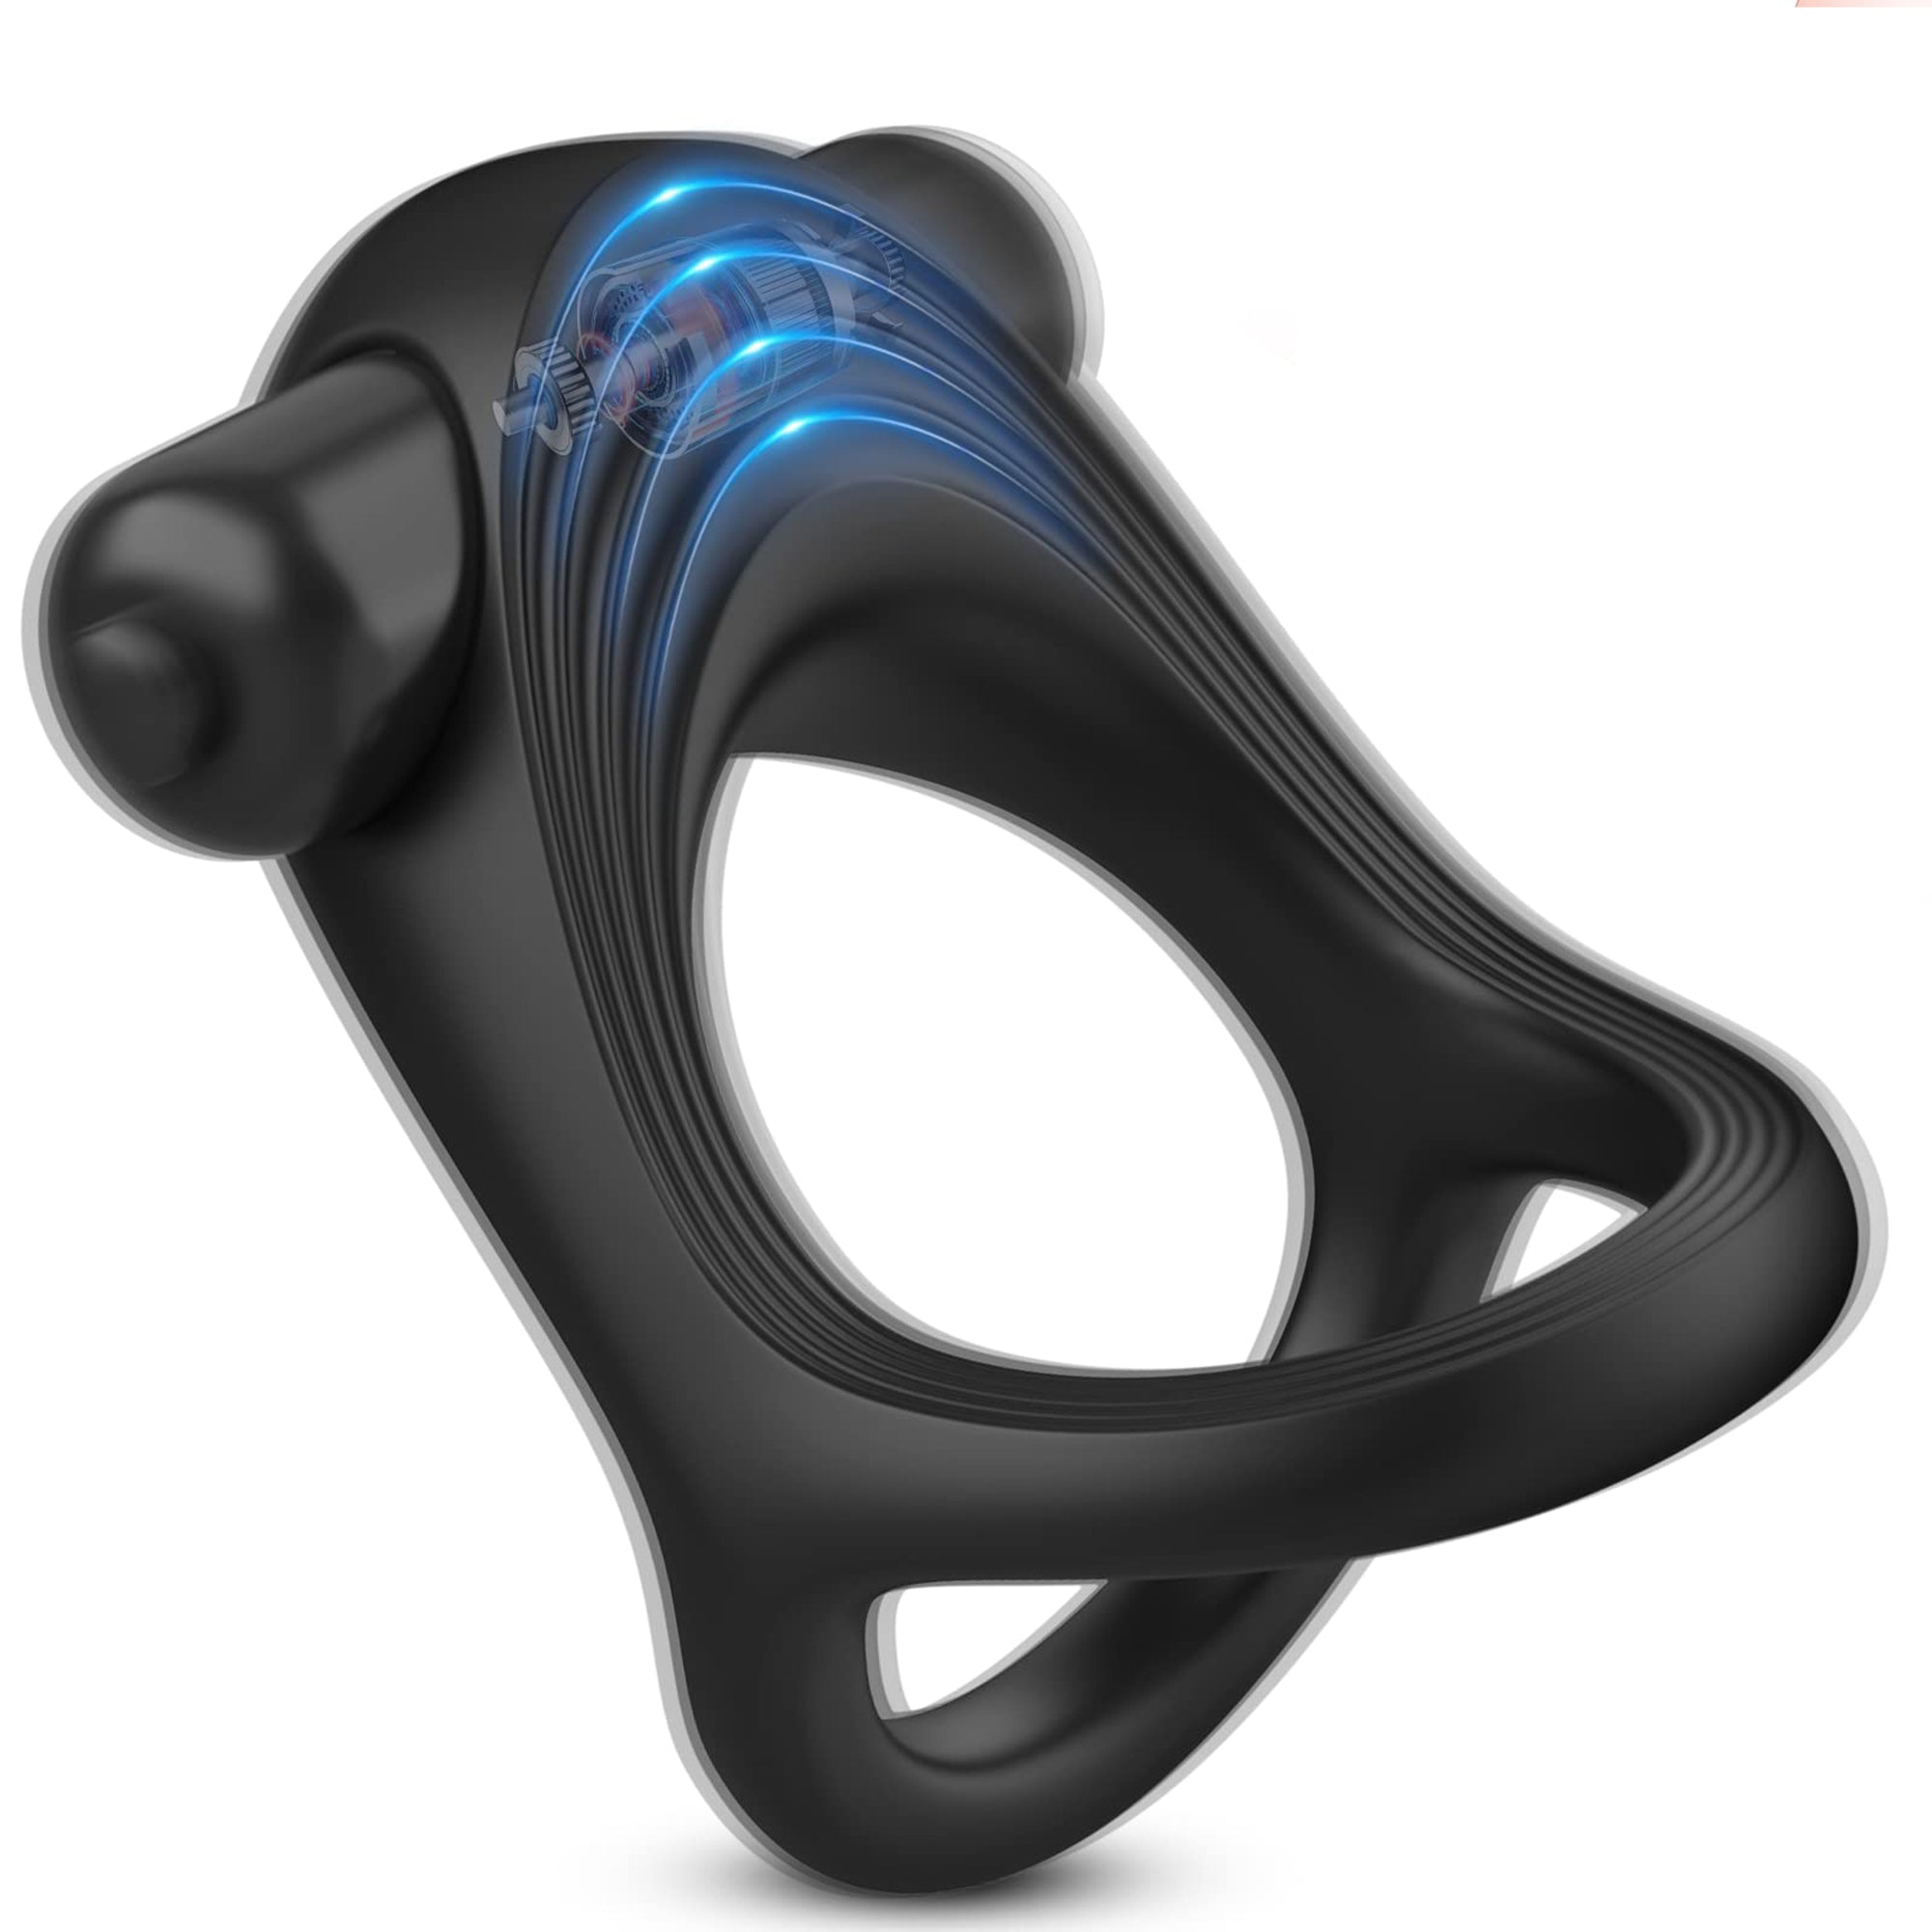 Stretchy Silicone Triangular Cock Ring with Vibrating Bullet